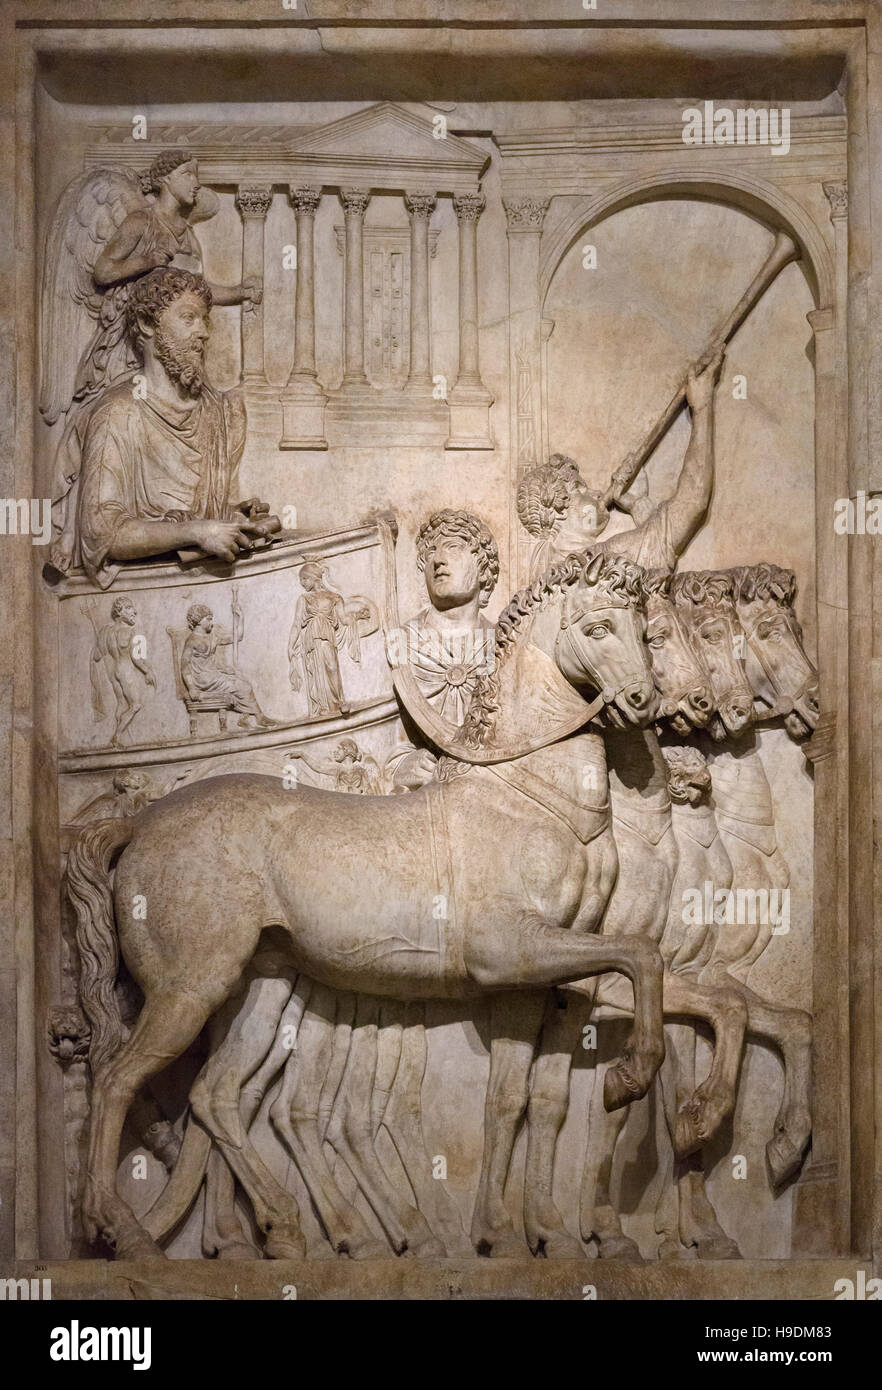 Rome. Italy. Relief panel (176-180 AD) depicting the triumph of Marcus Aurelius over the Germanic peoples and Sarmatians, Capitoline Museum. Stock Photo